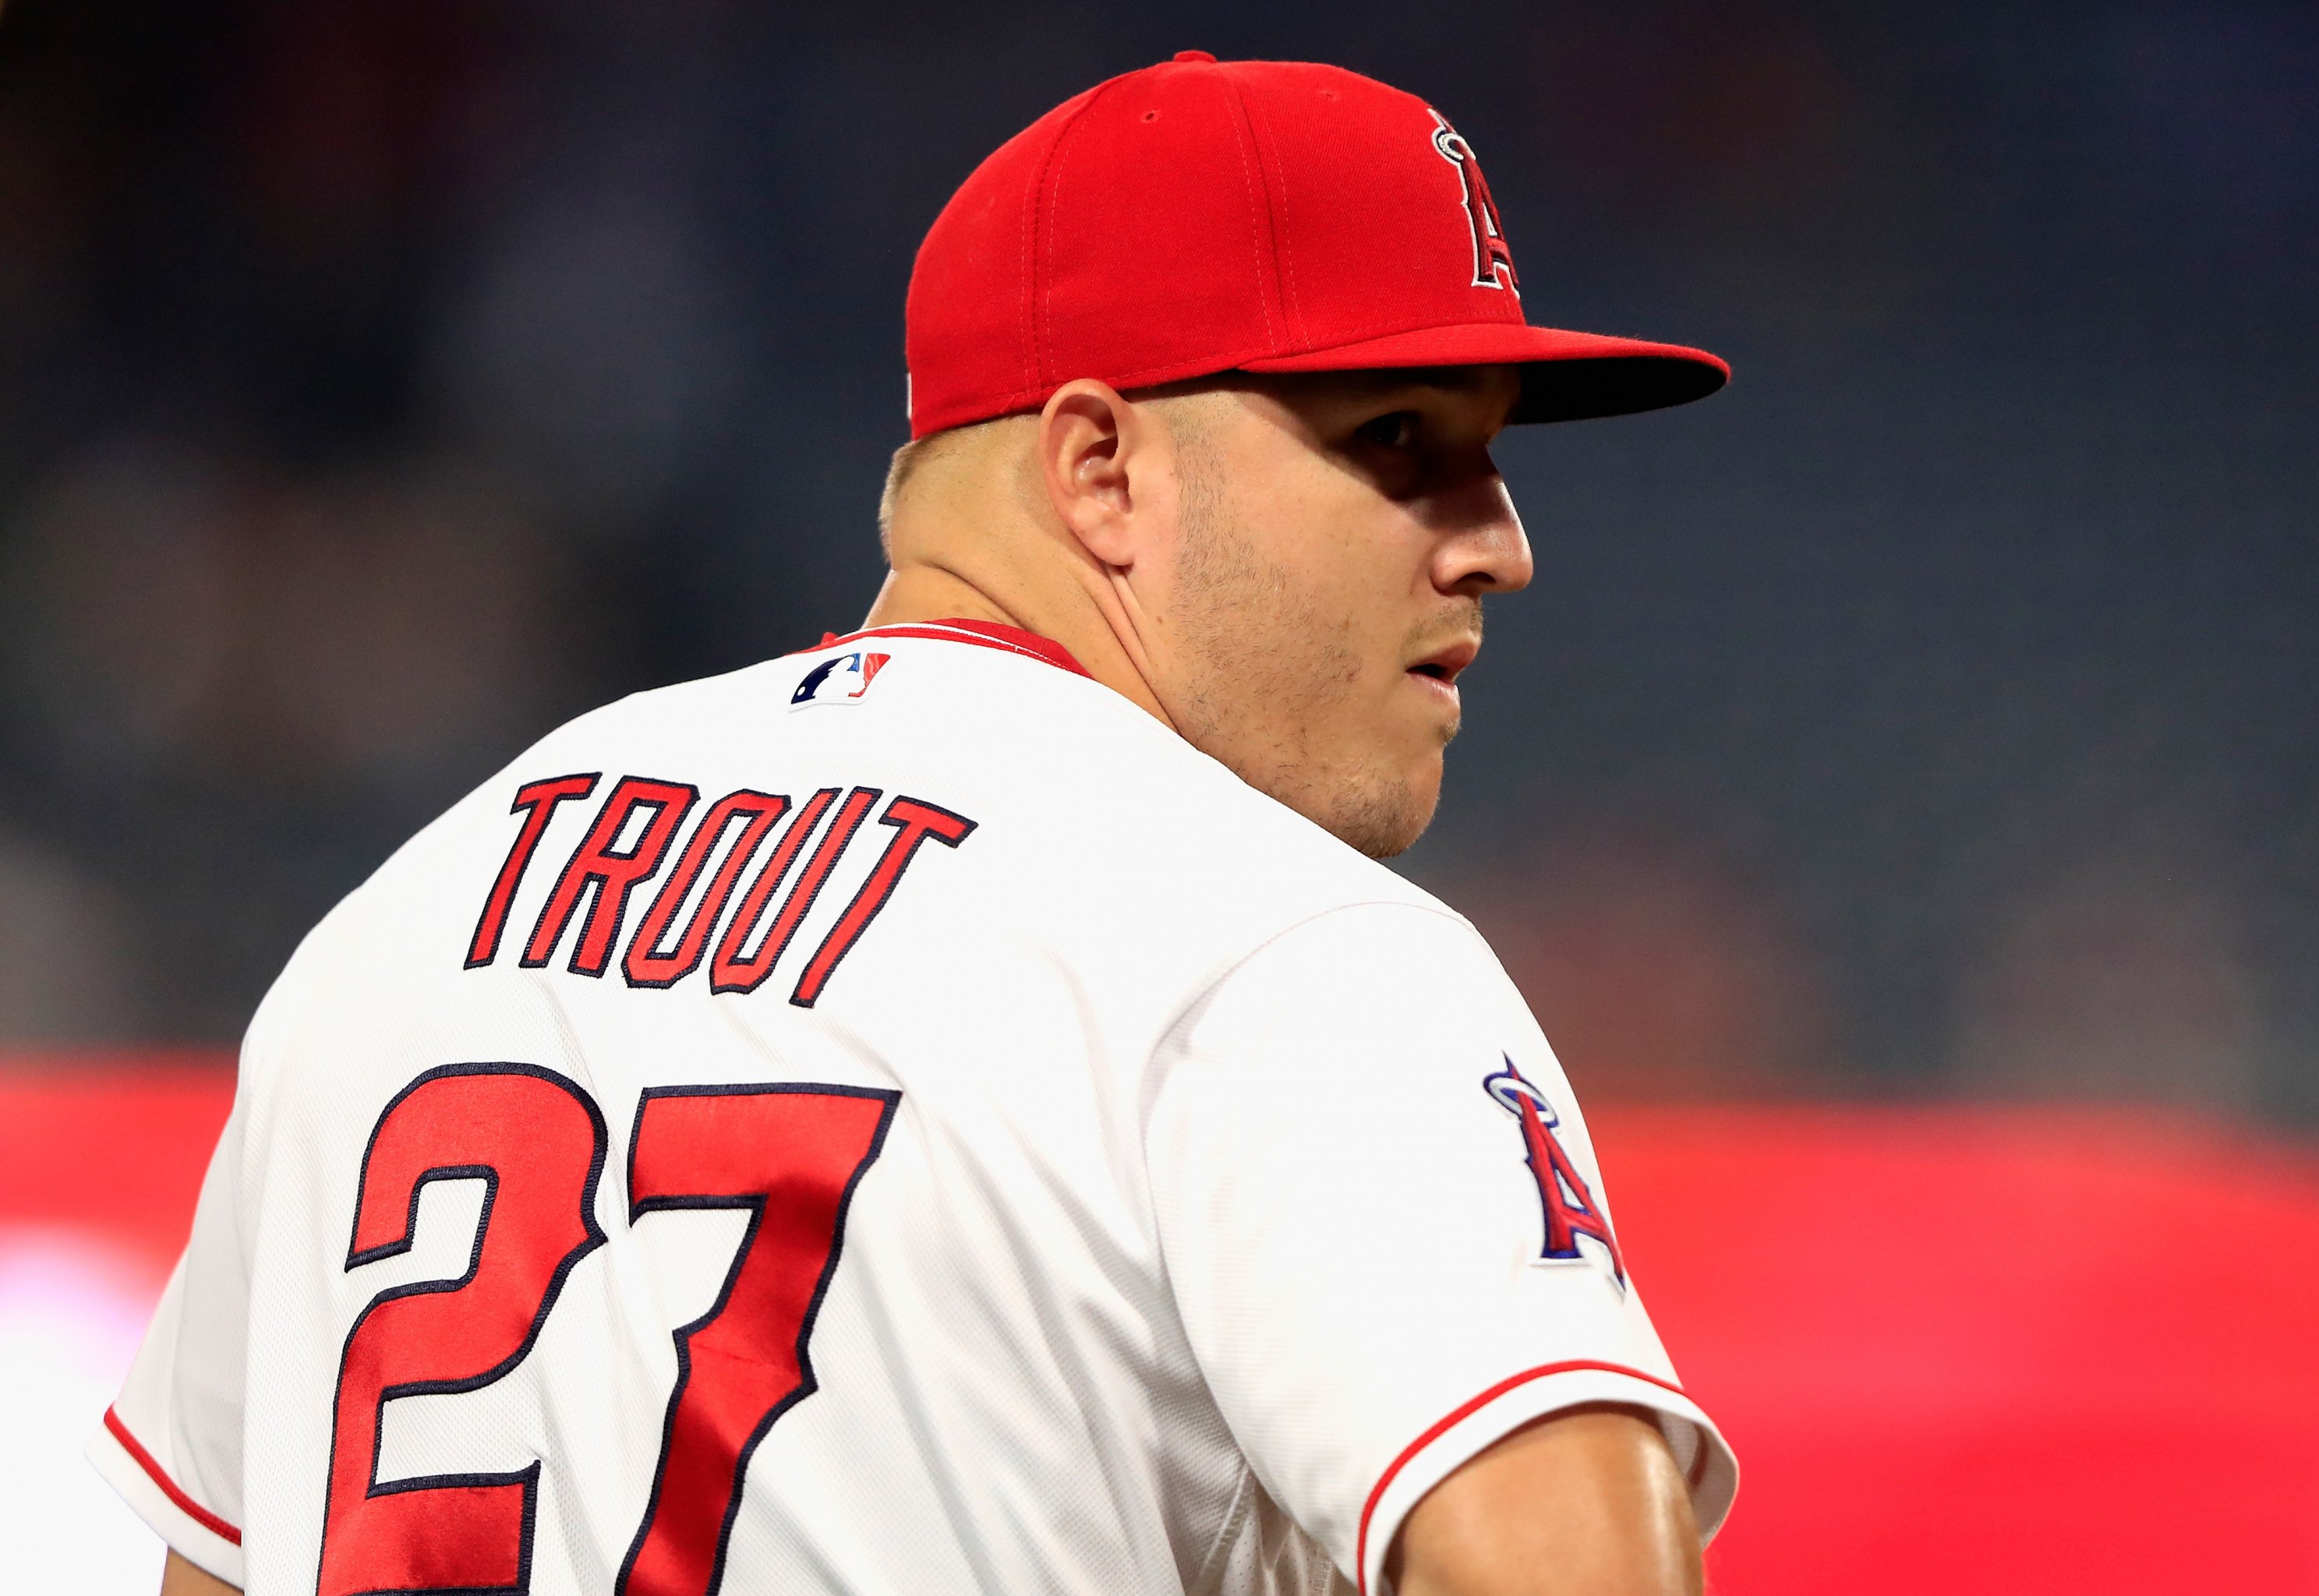 Mike Trout on X: Thanks to @ESPN, @LandRoverUSA, and man's best